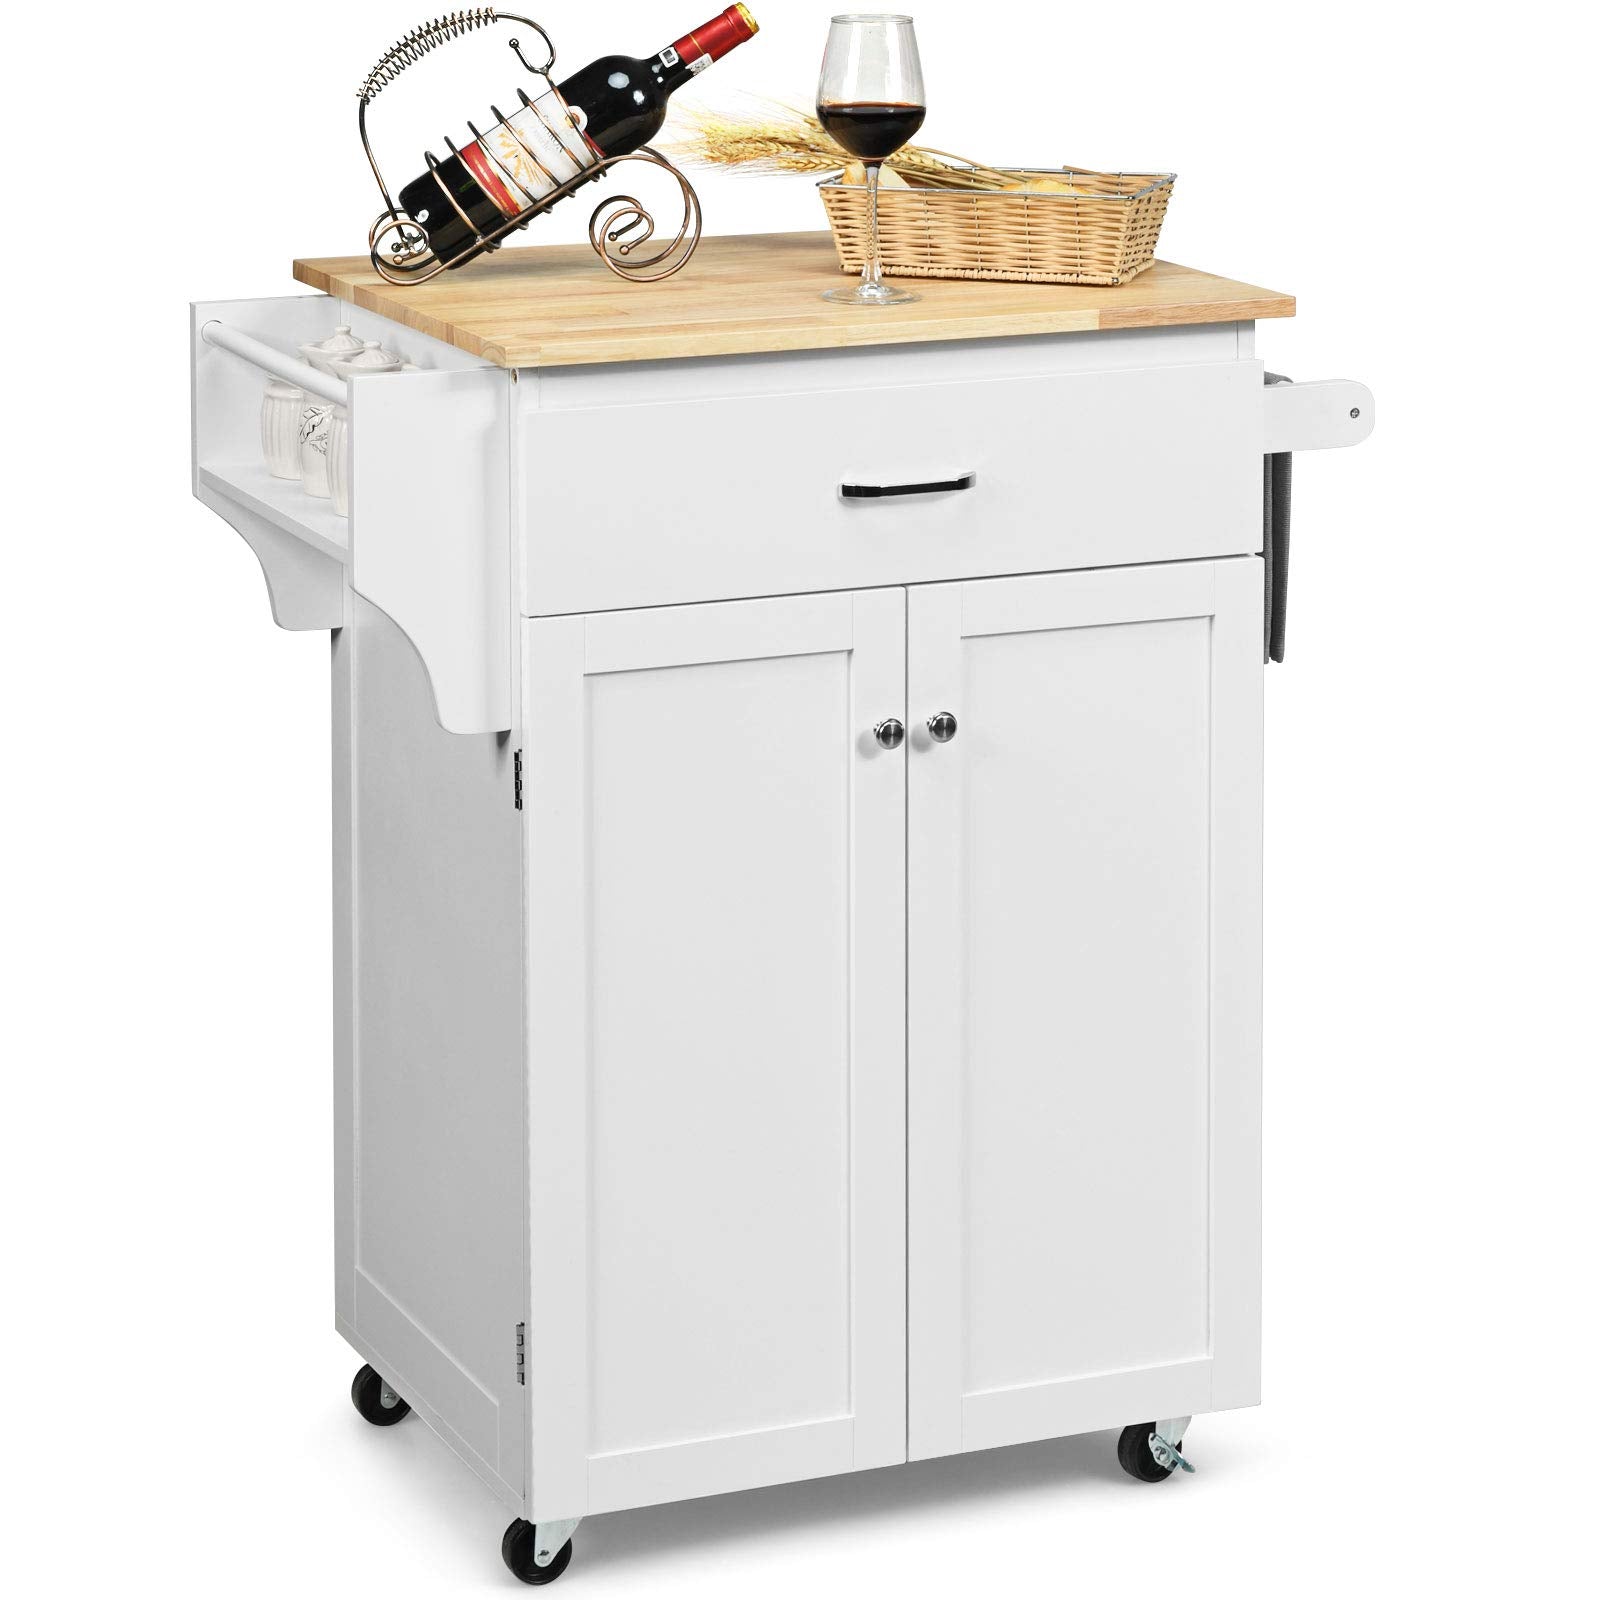 Giantex Rolling Kitchen Island, Kitchen Trolley Cart with Spice Rack, Large Drawer